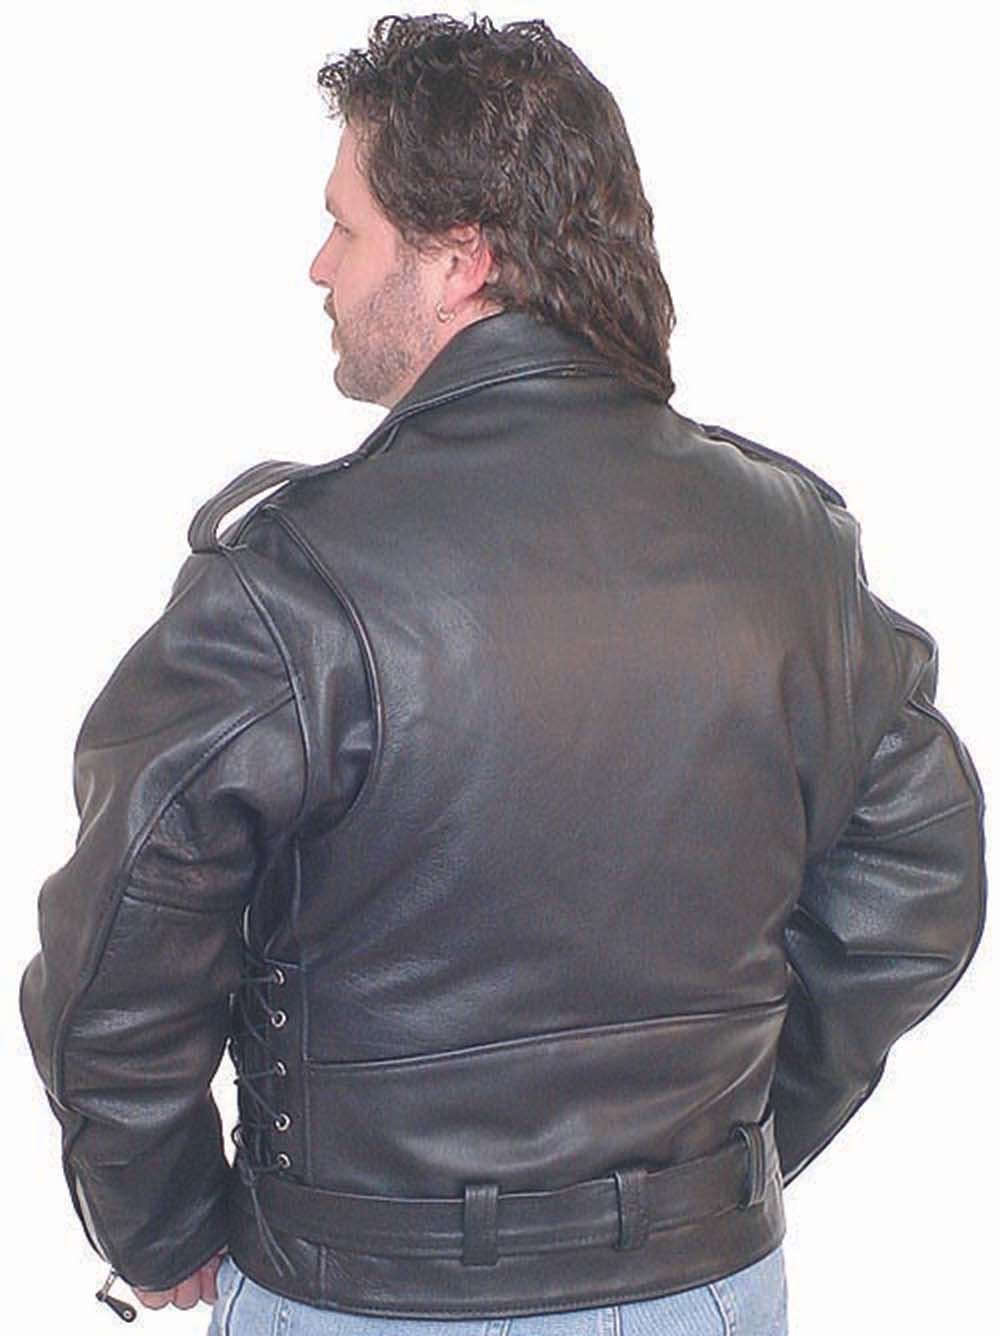 biker showing off the back of his big and tall leather coat